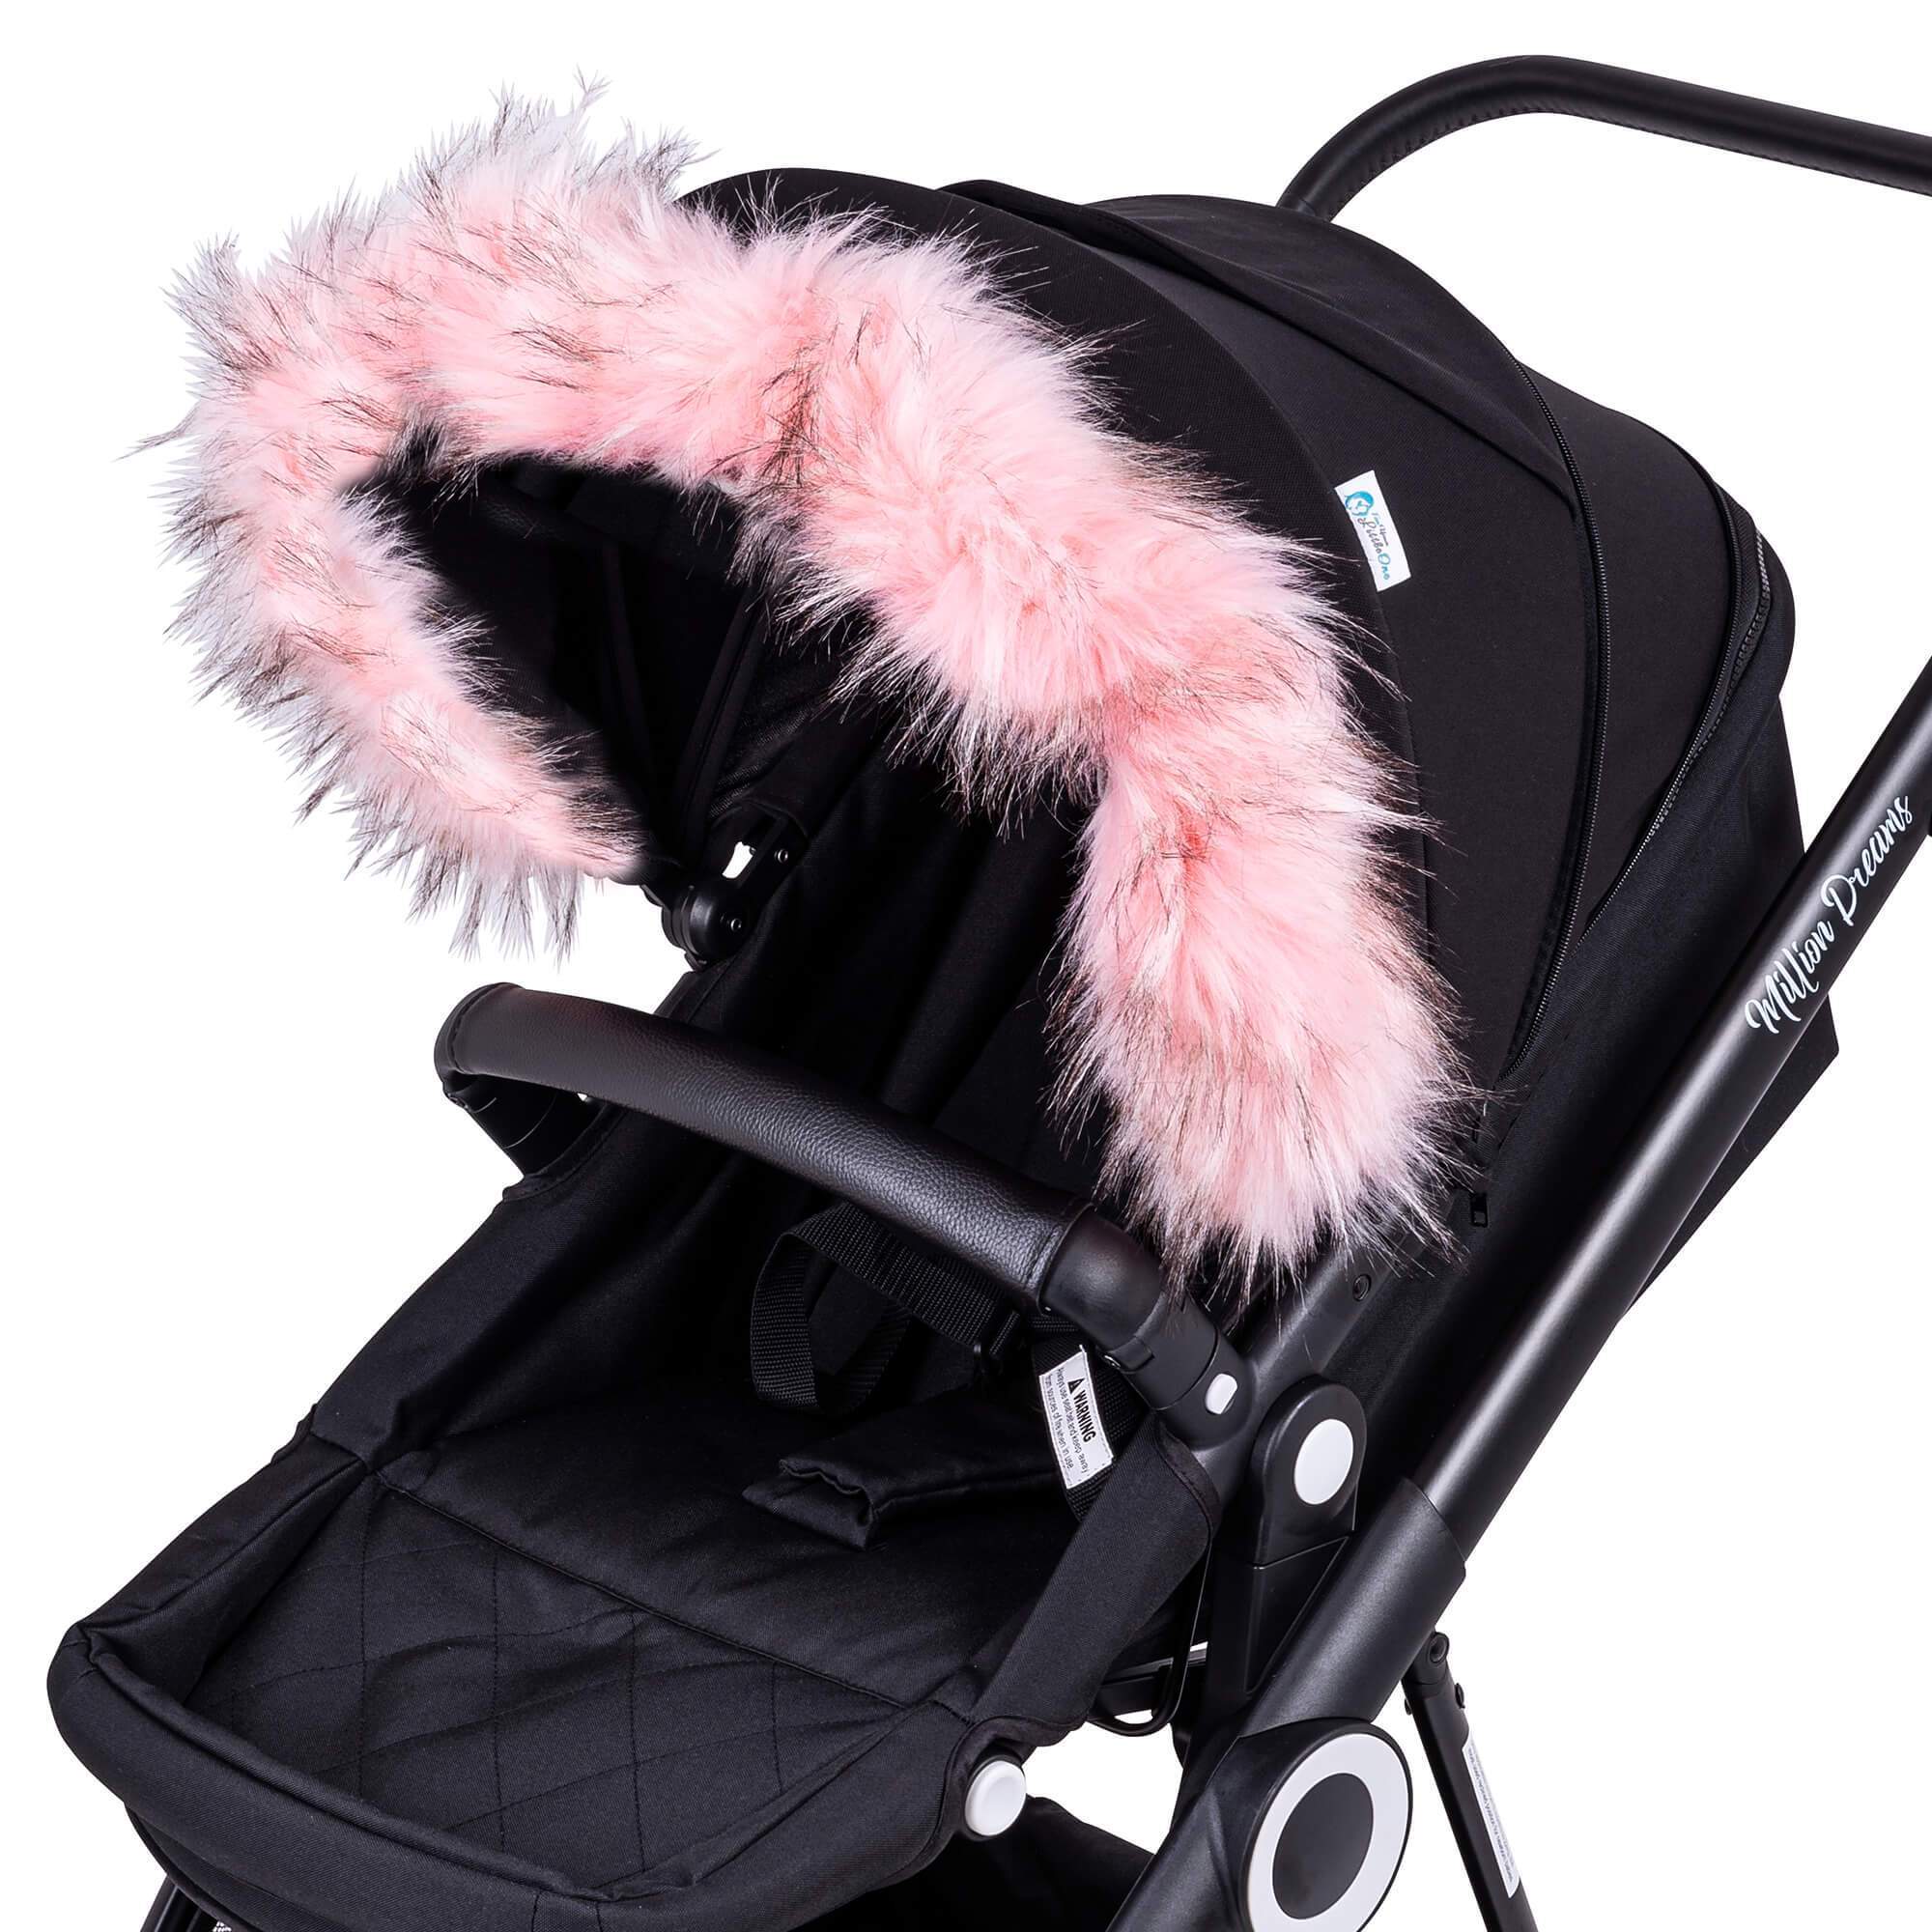 Pram Fur Hood Trim Attachment for Pushchair Compatible with Bebe Confort - For Your Little One